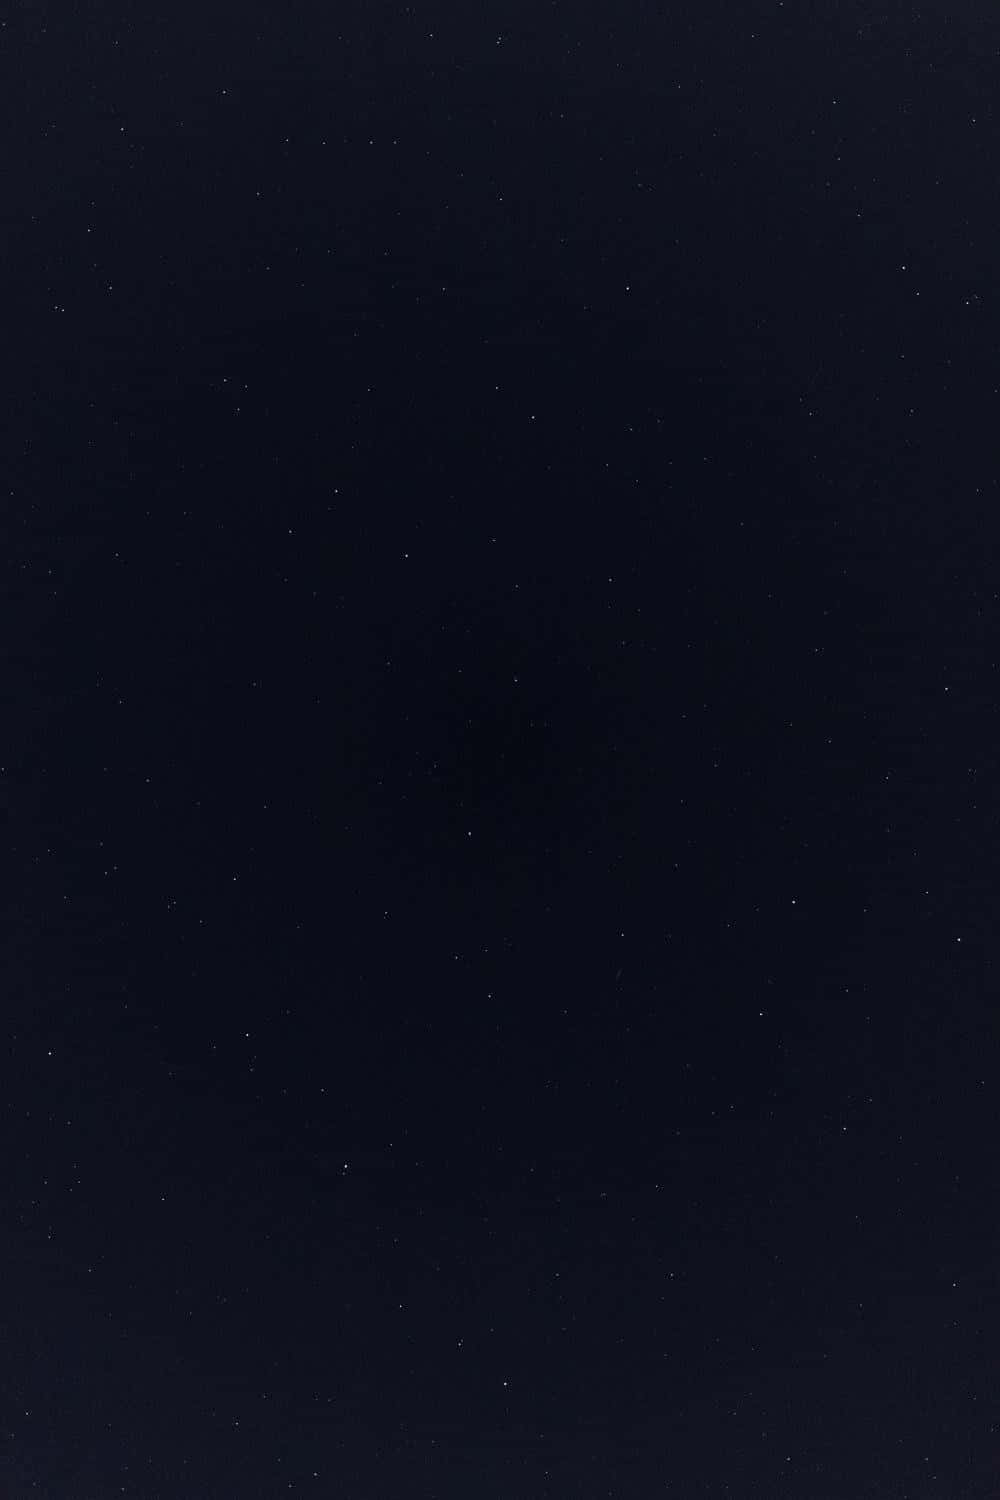 A Black Background With Stars In The Sky